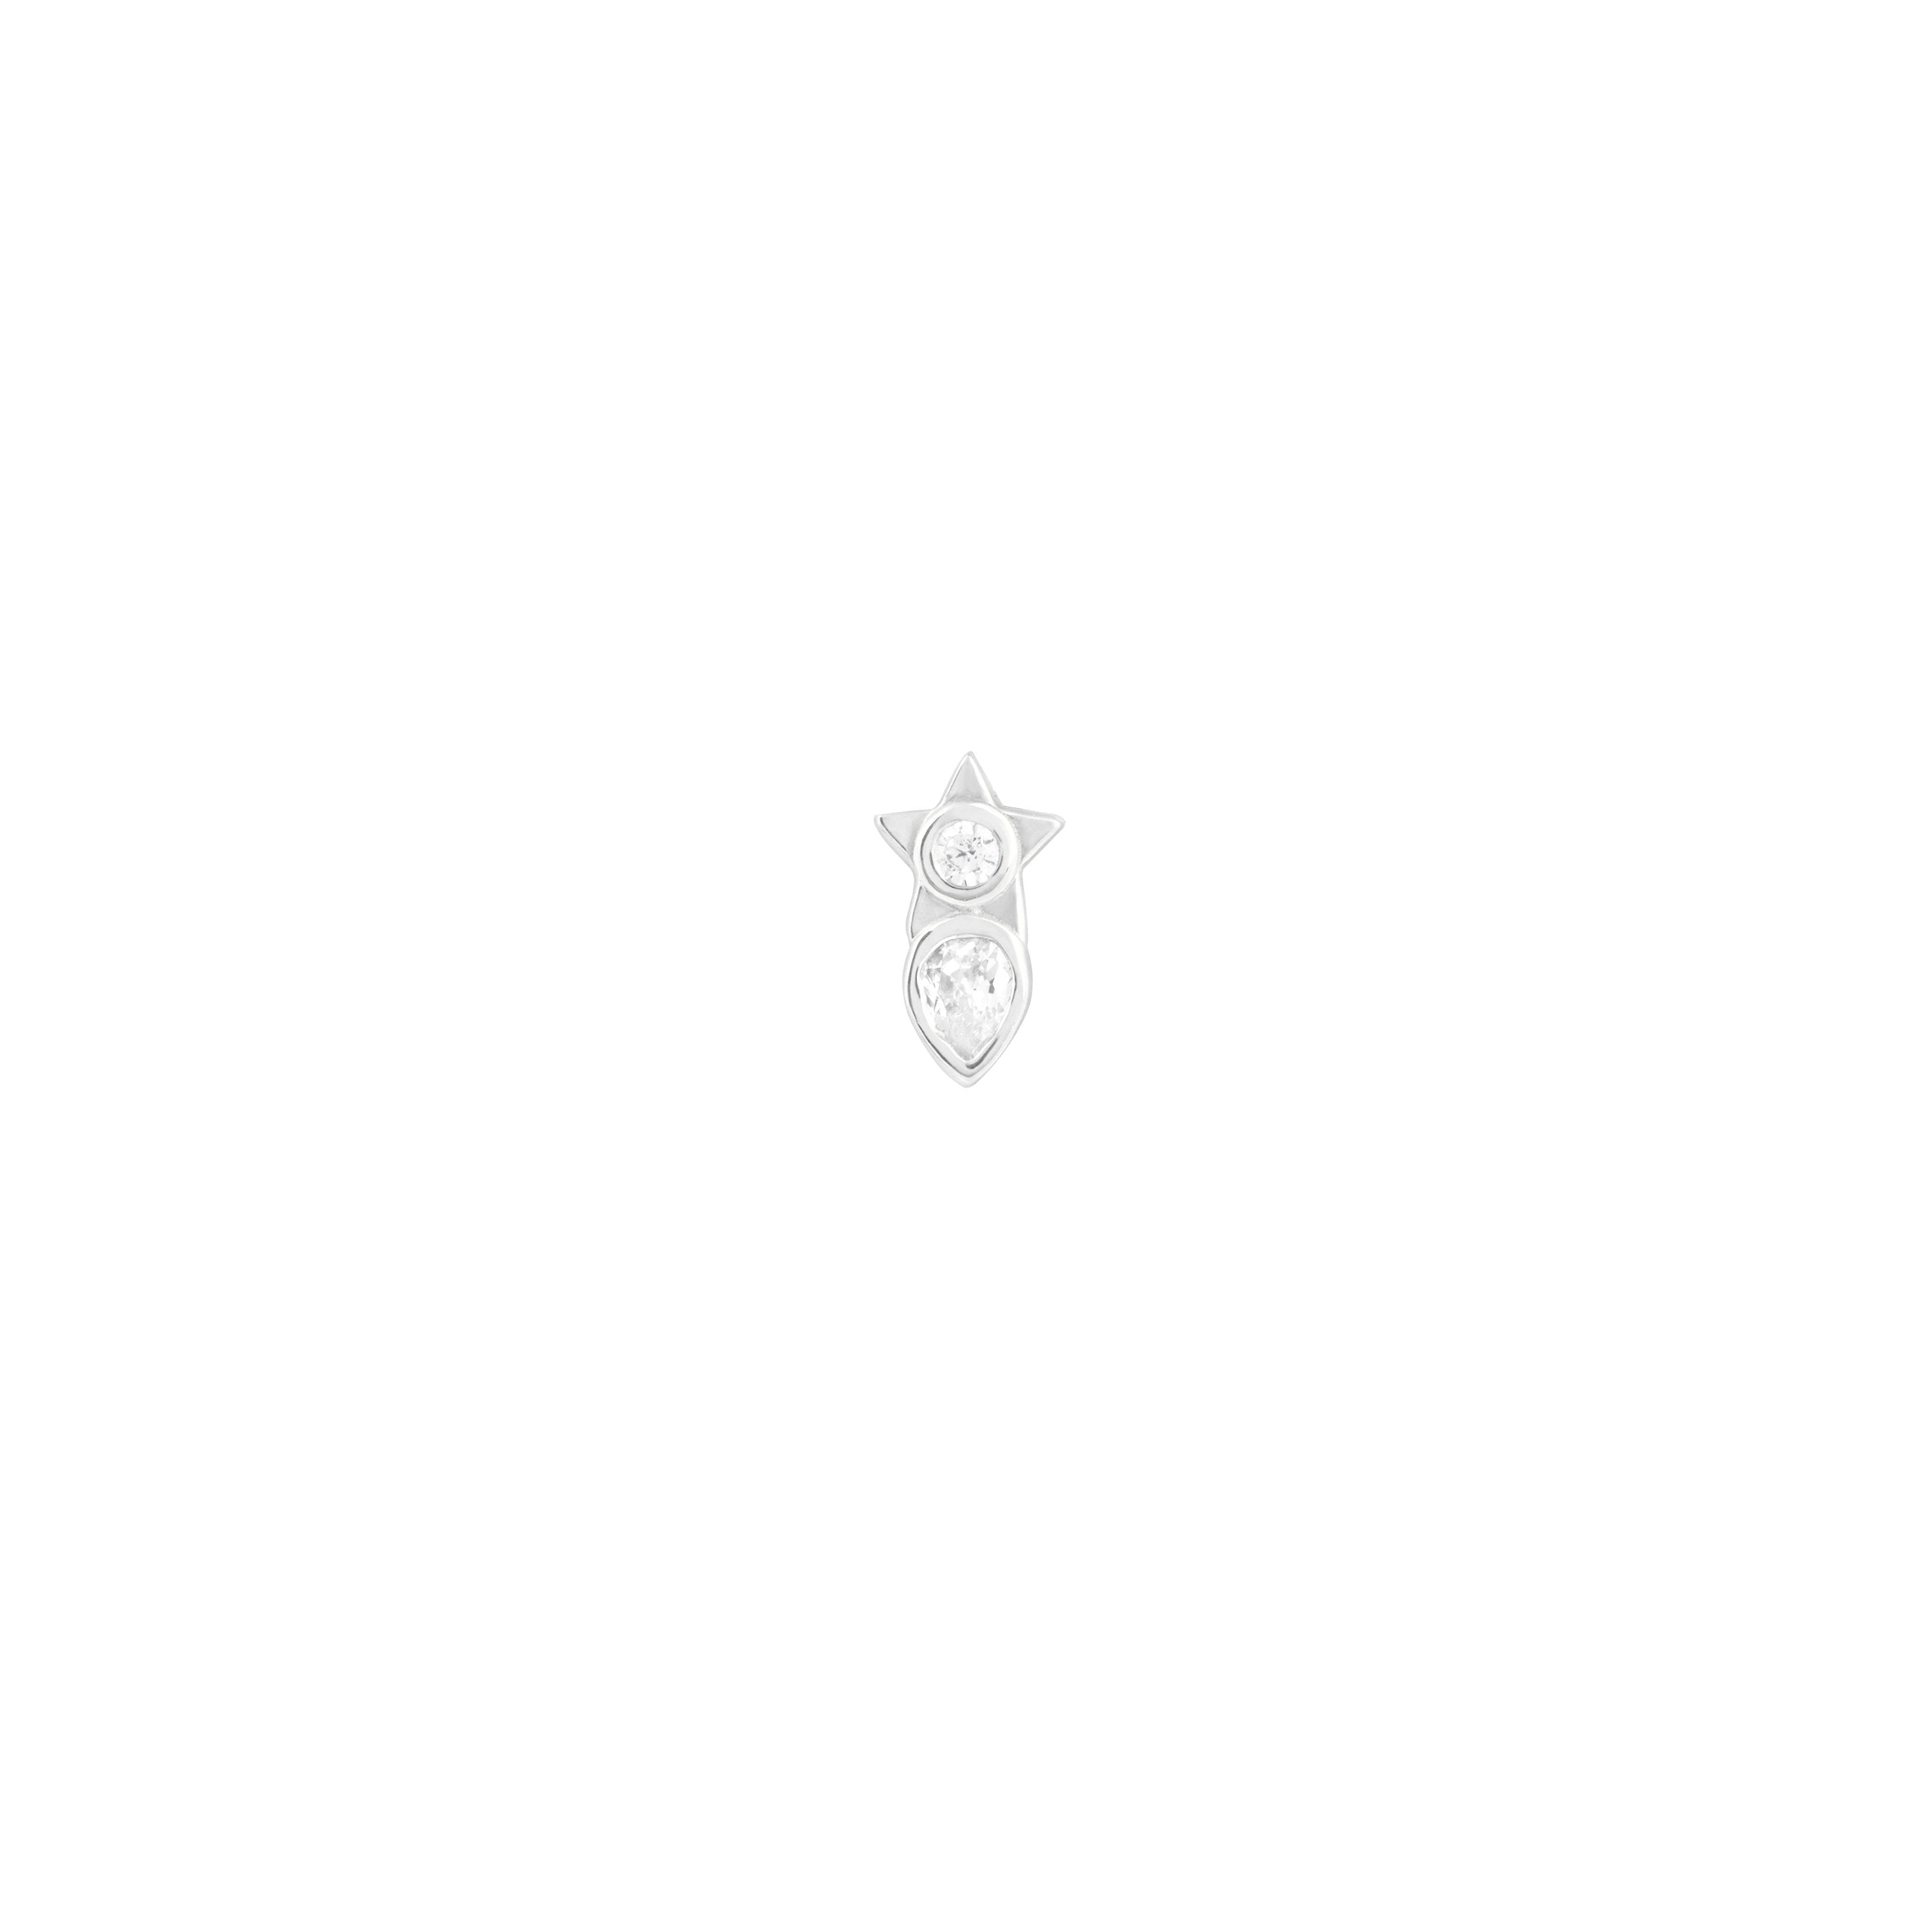 Solid White Gold Crystal Star Piercing Stud